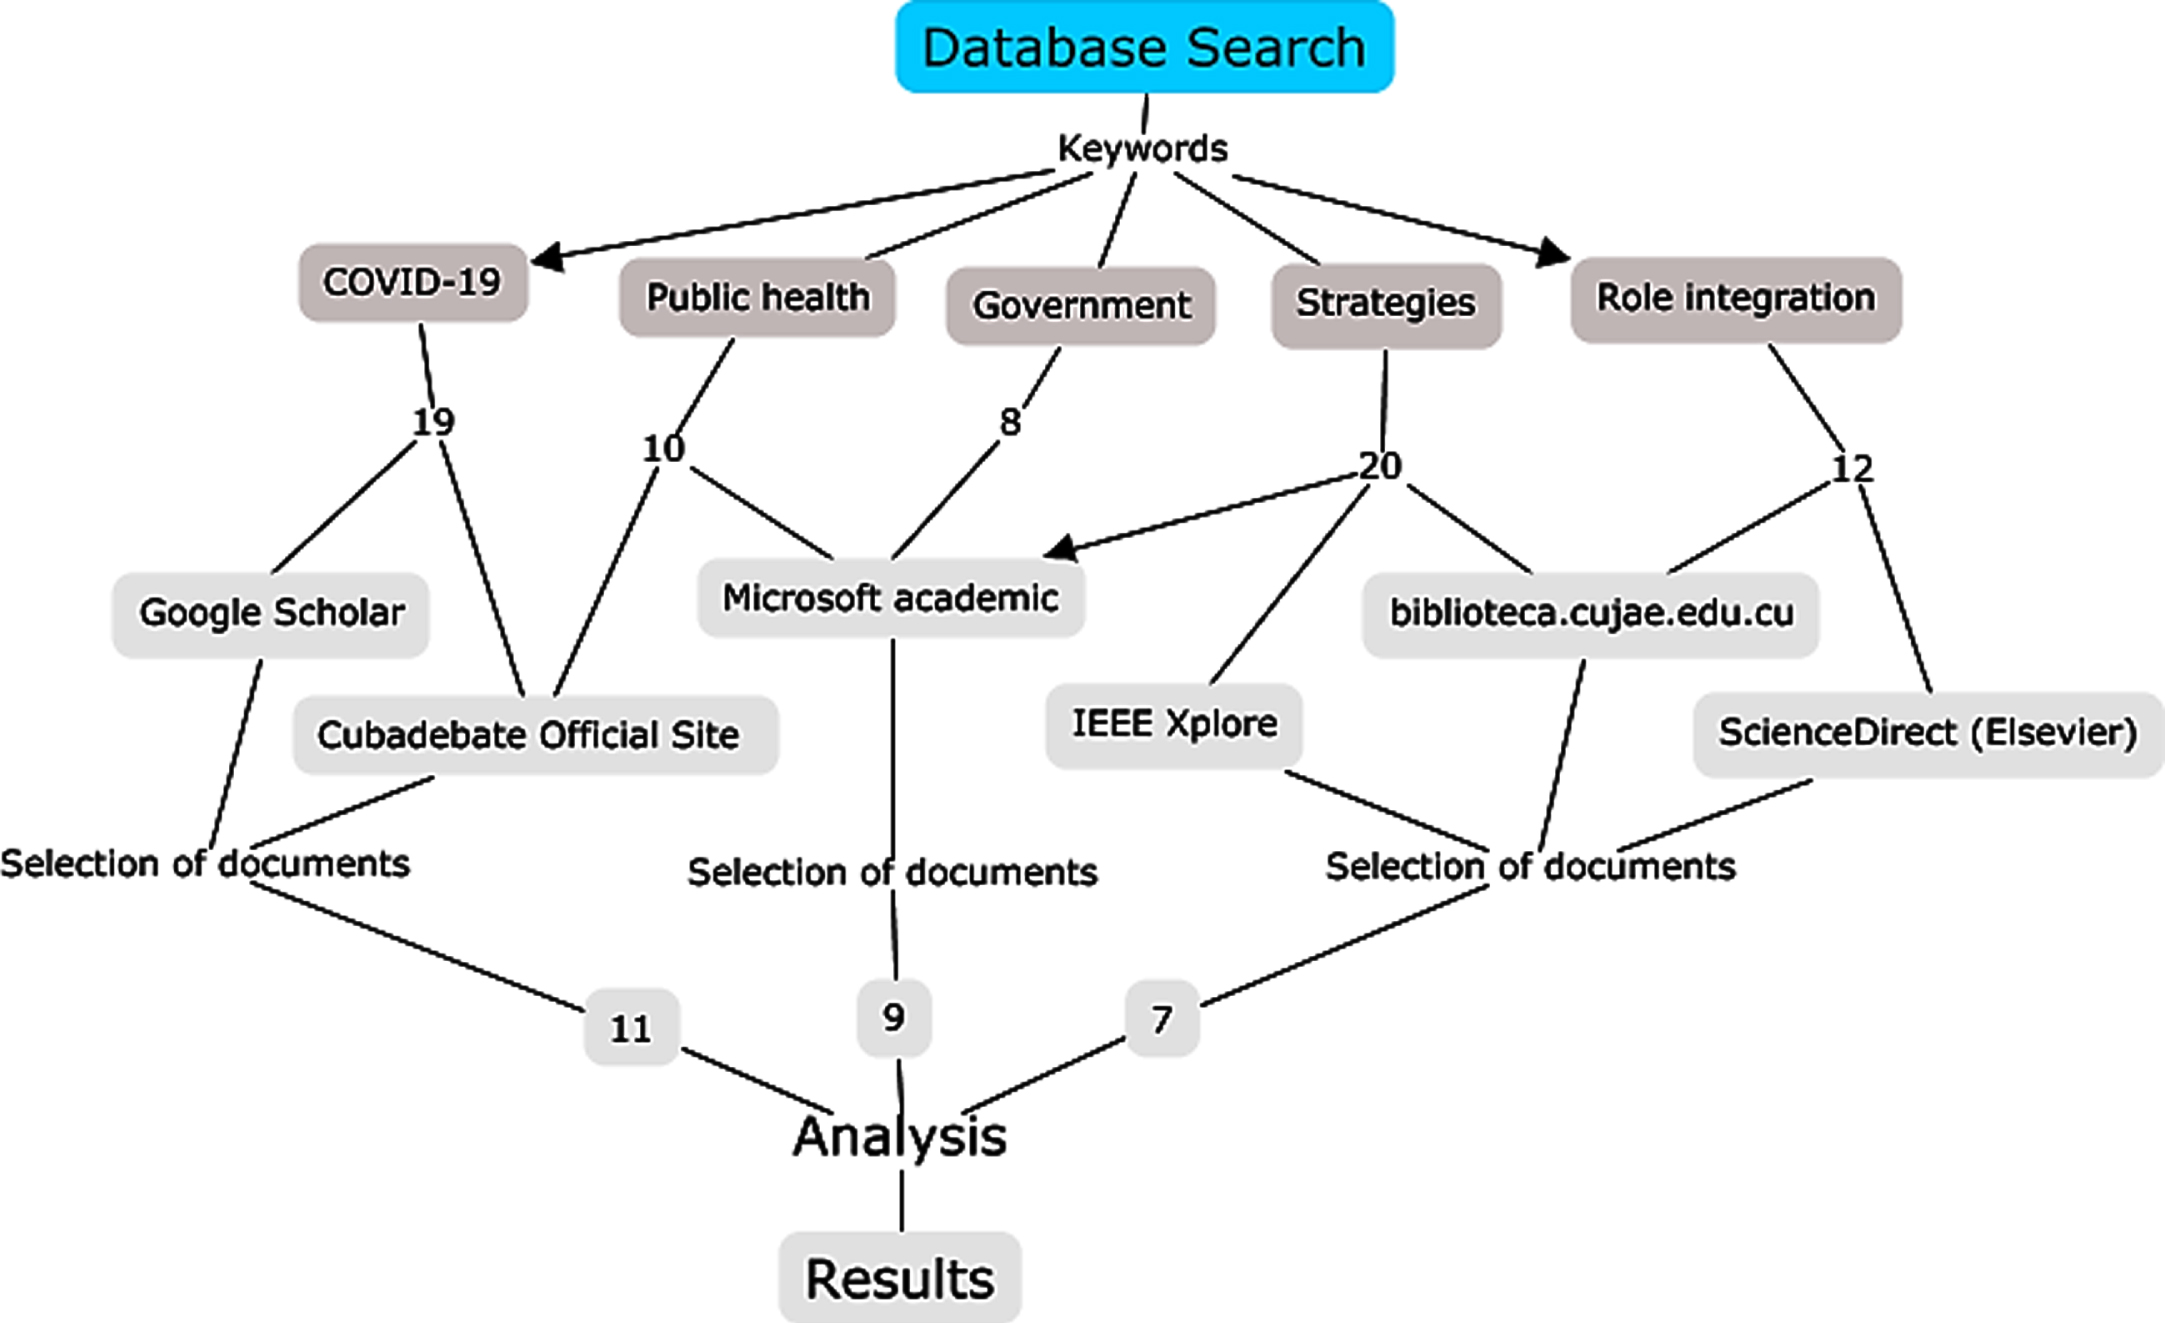 Data search and analysis method. Source: Authors.